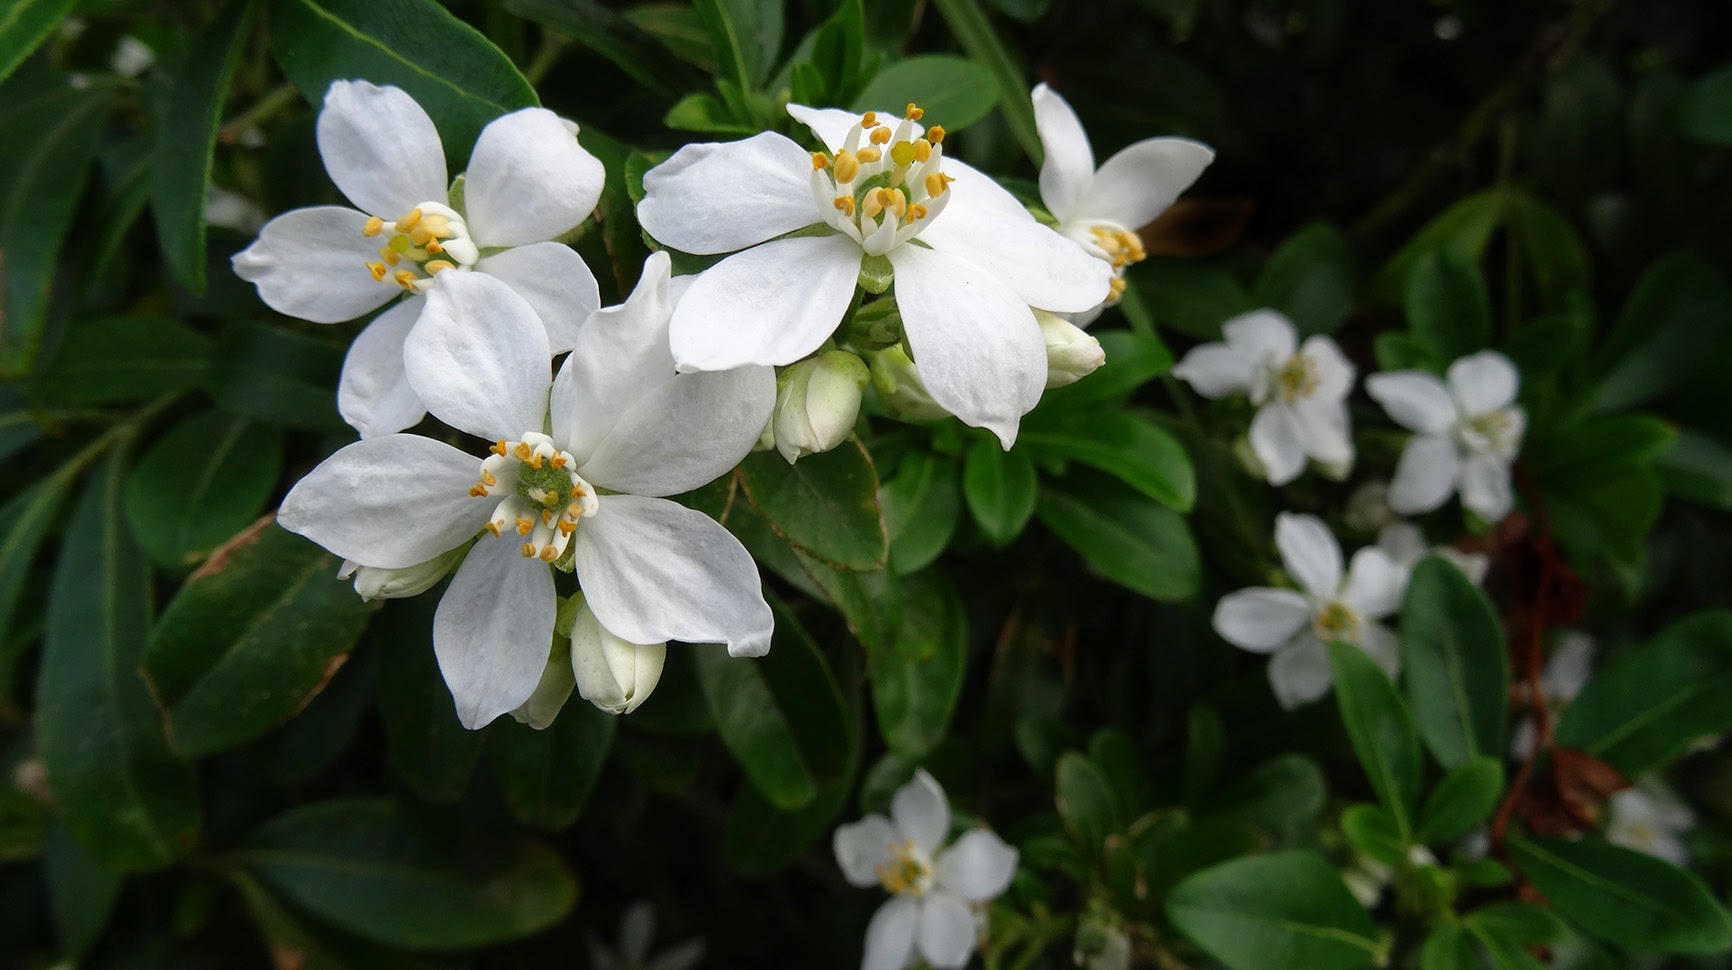 The Plant Hunter Schizophragma Climbs In Popularity